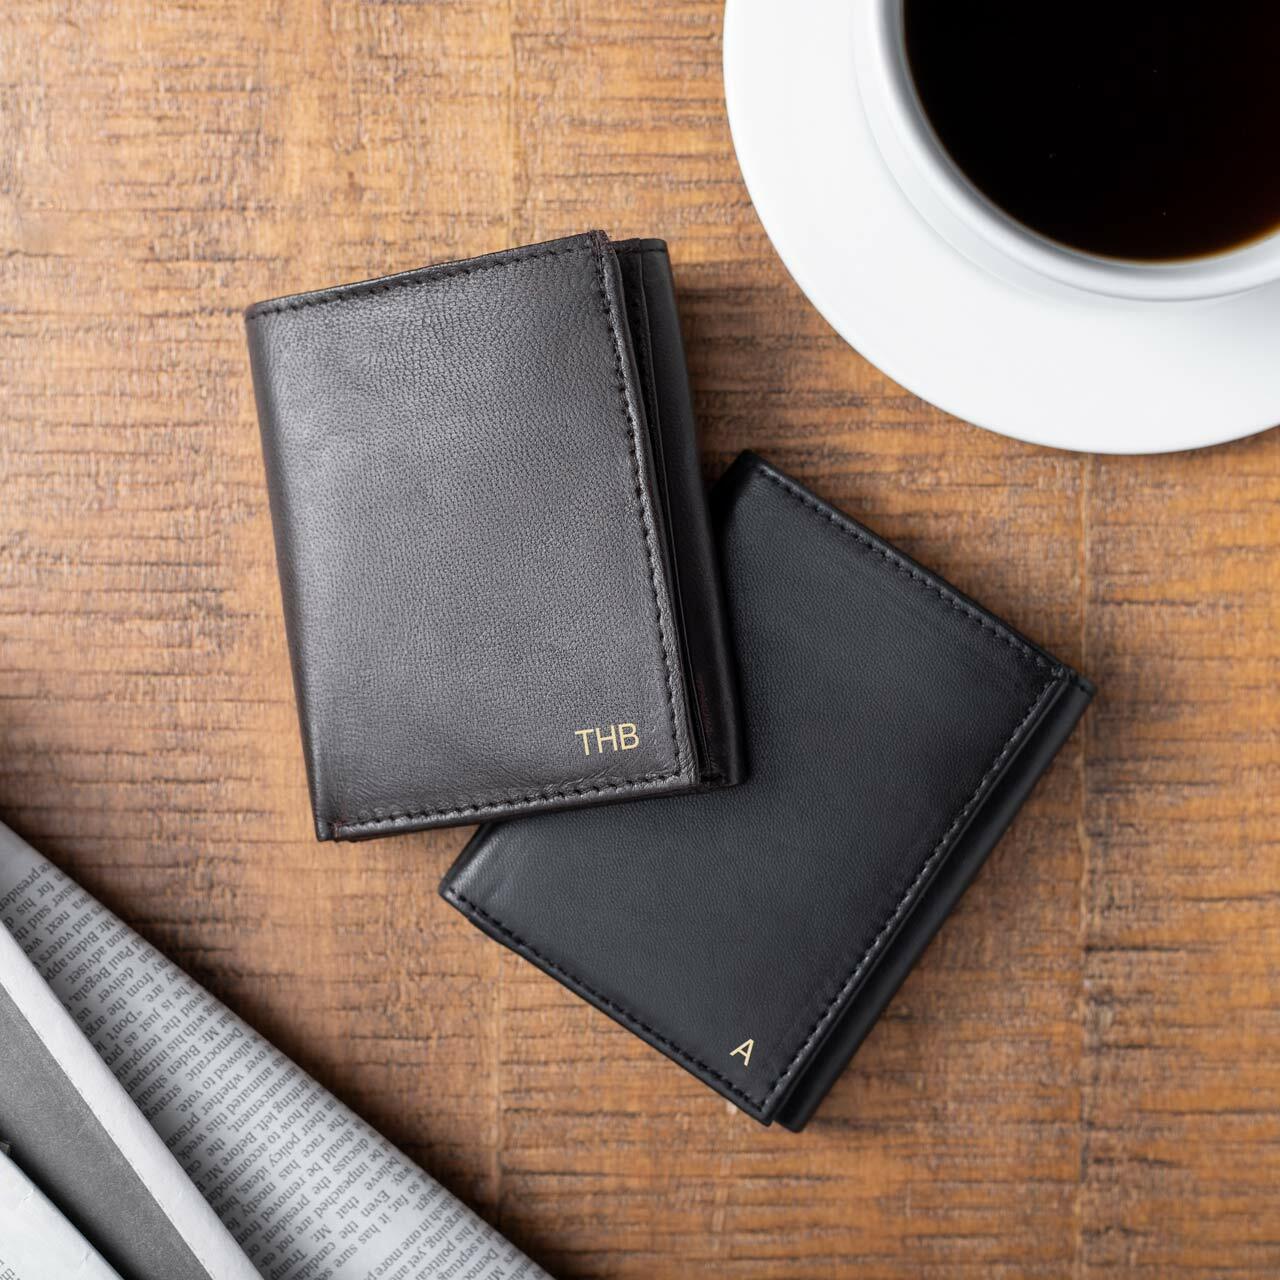 Personalized Black Wallet with Initials